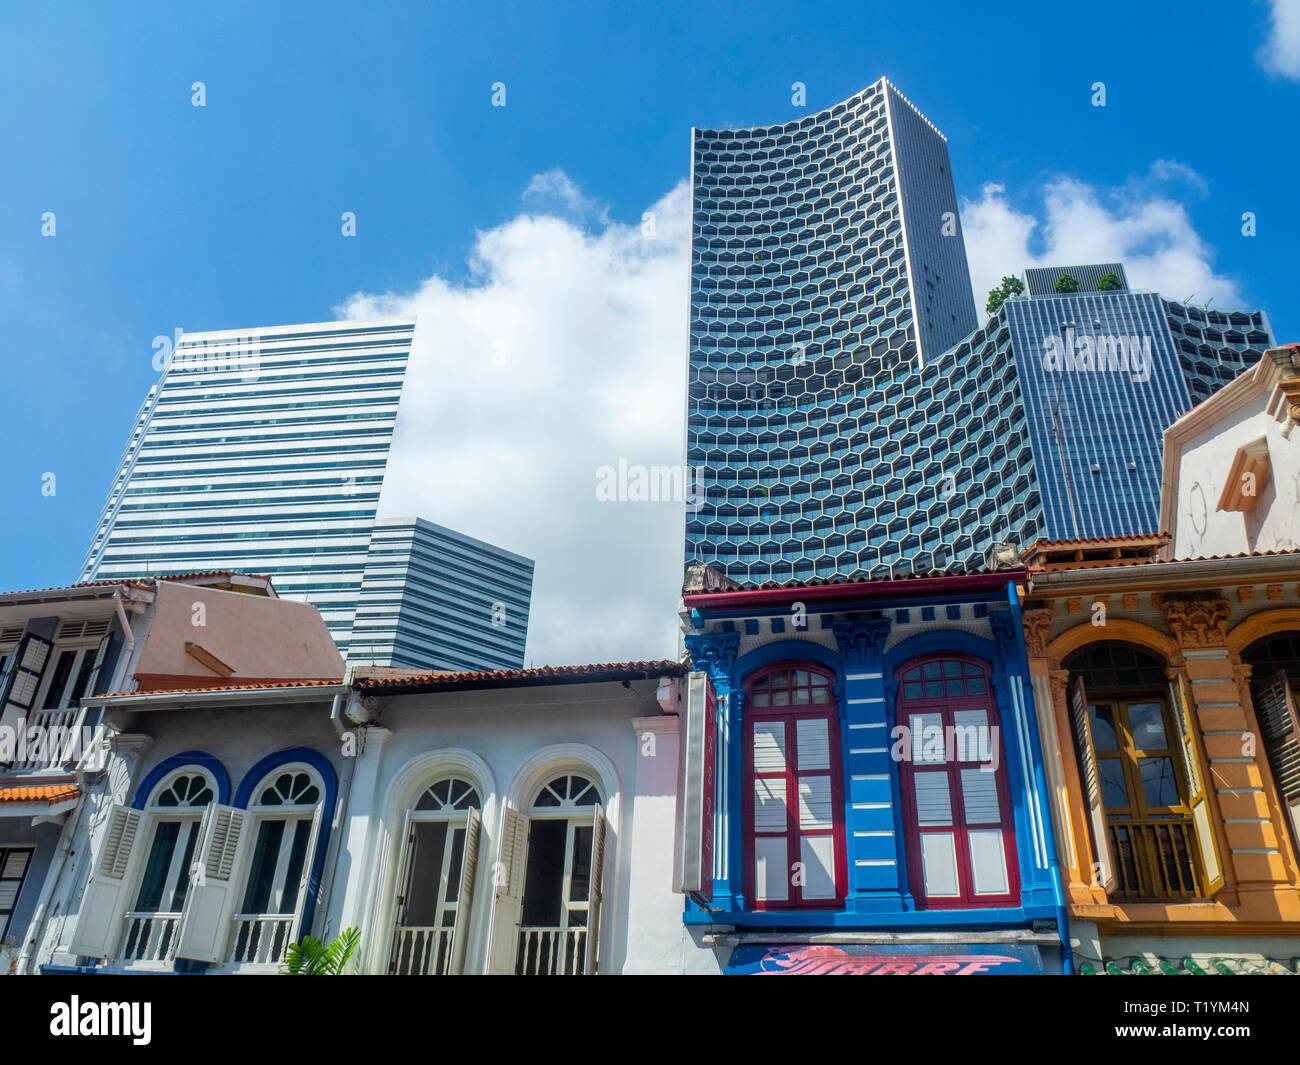 DUO and Gateway office towers over Arab Street traditional shophouses fabric shops Kampong Glam Singapore. Stock Photo